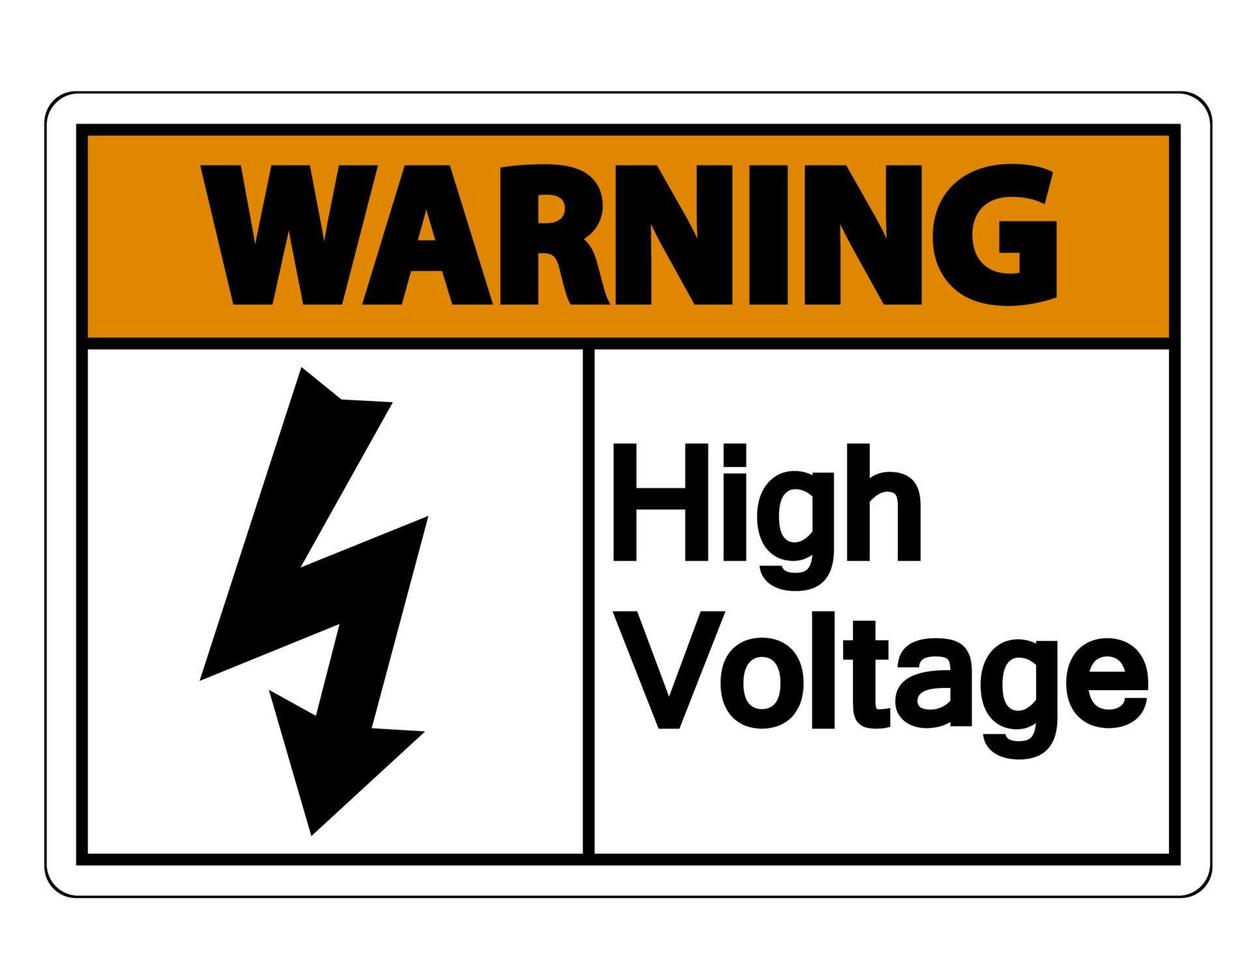 Warning high voltage sign on white background vector